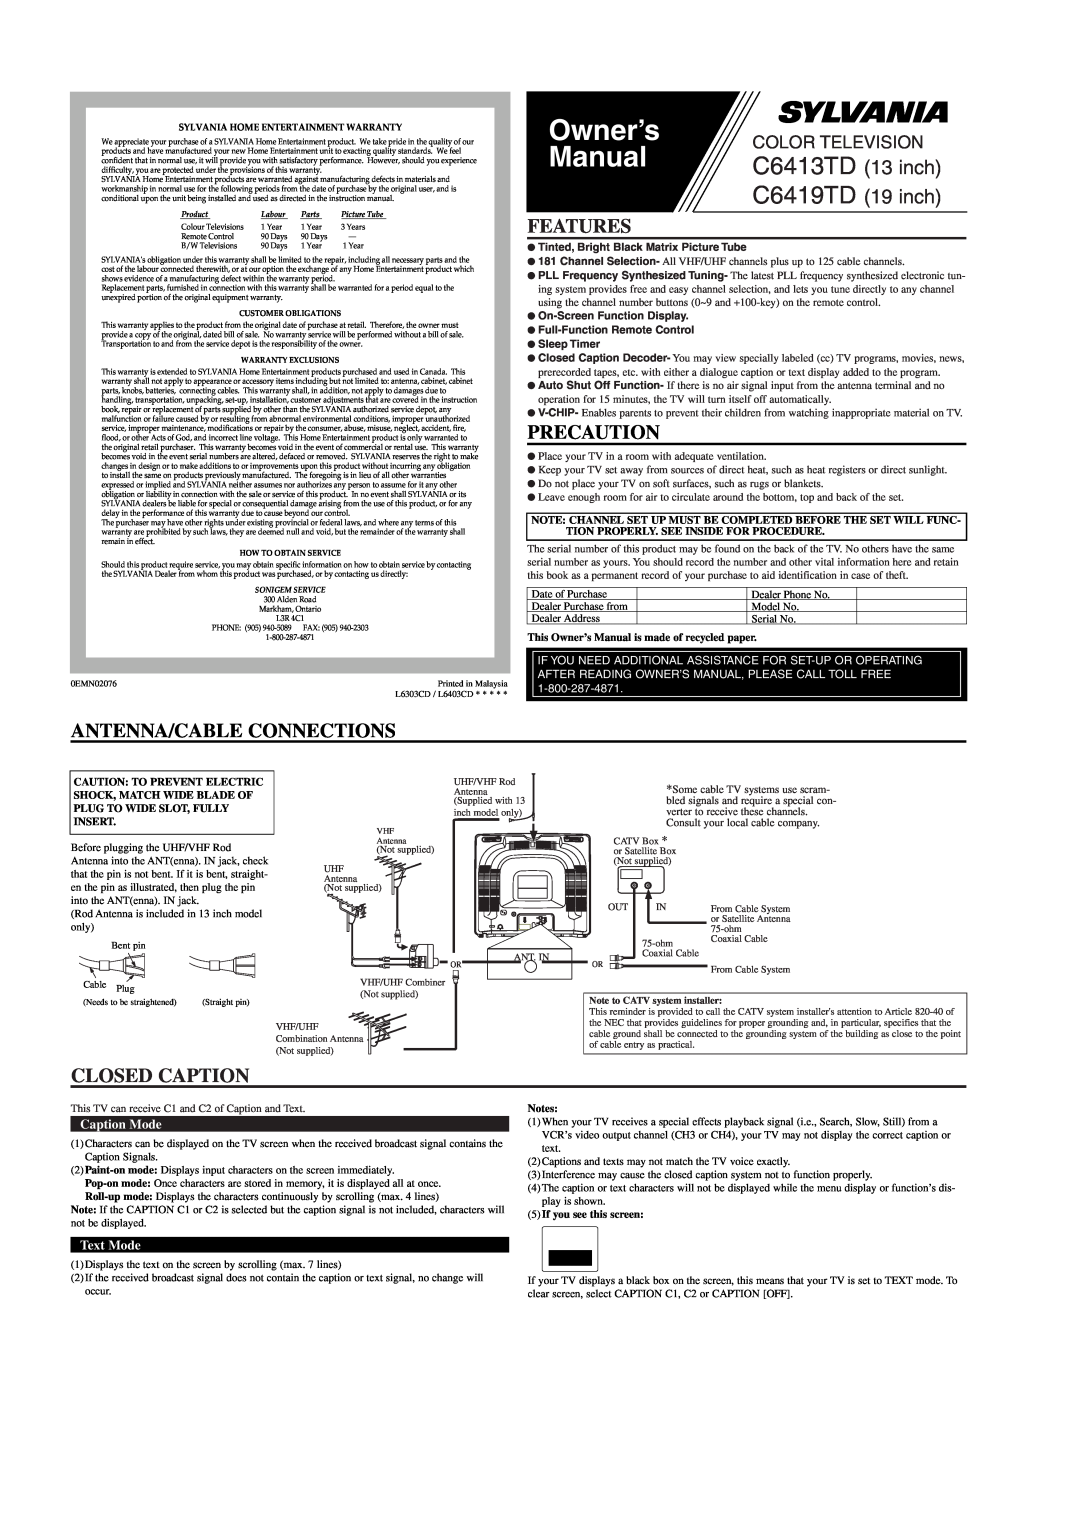 Sylvania C6413TD, C5419TD owner manual Owner’s, Manual, Features, Precaution, Antenna/Cable Connections, Closed Caption 